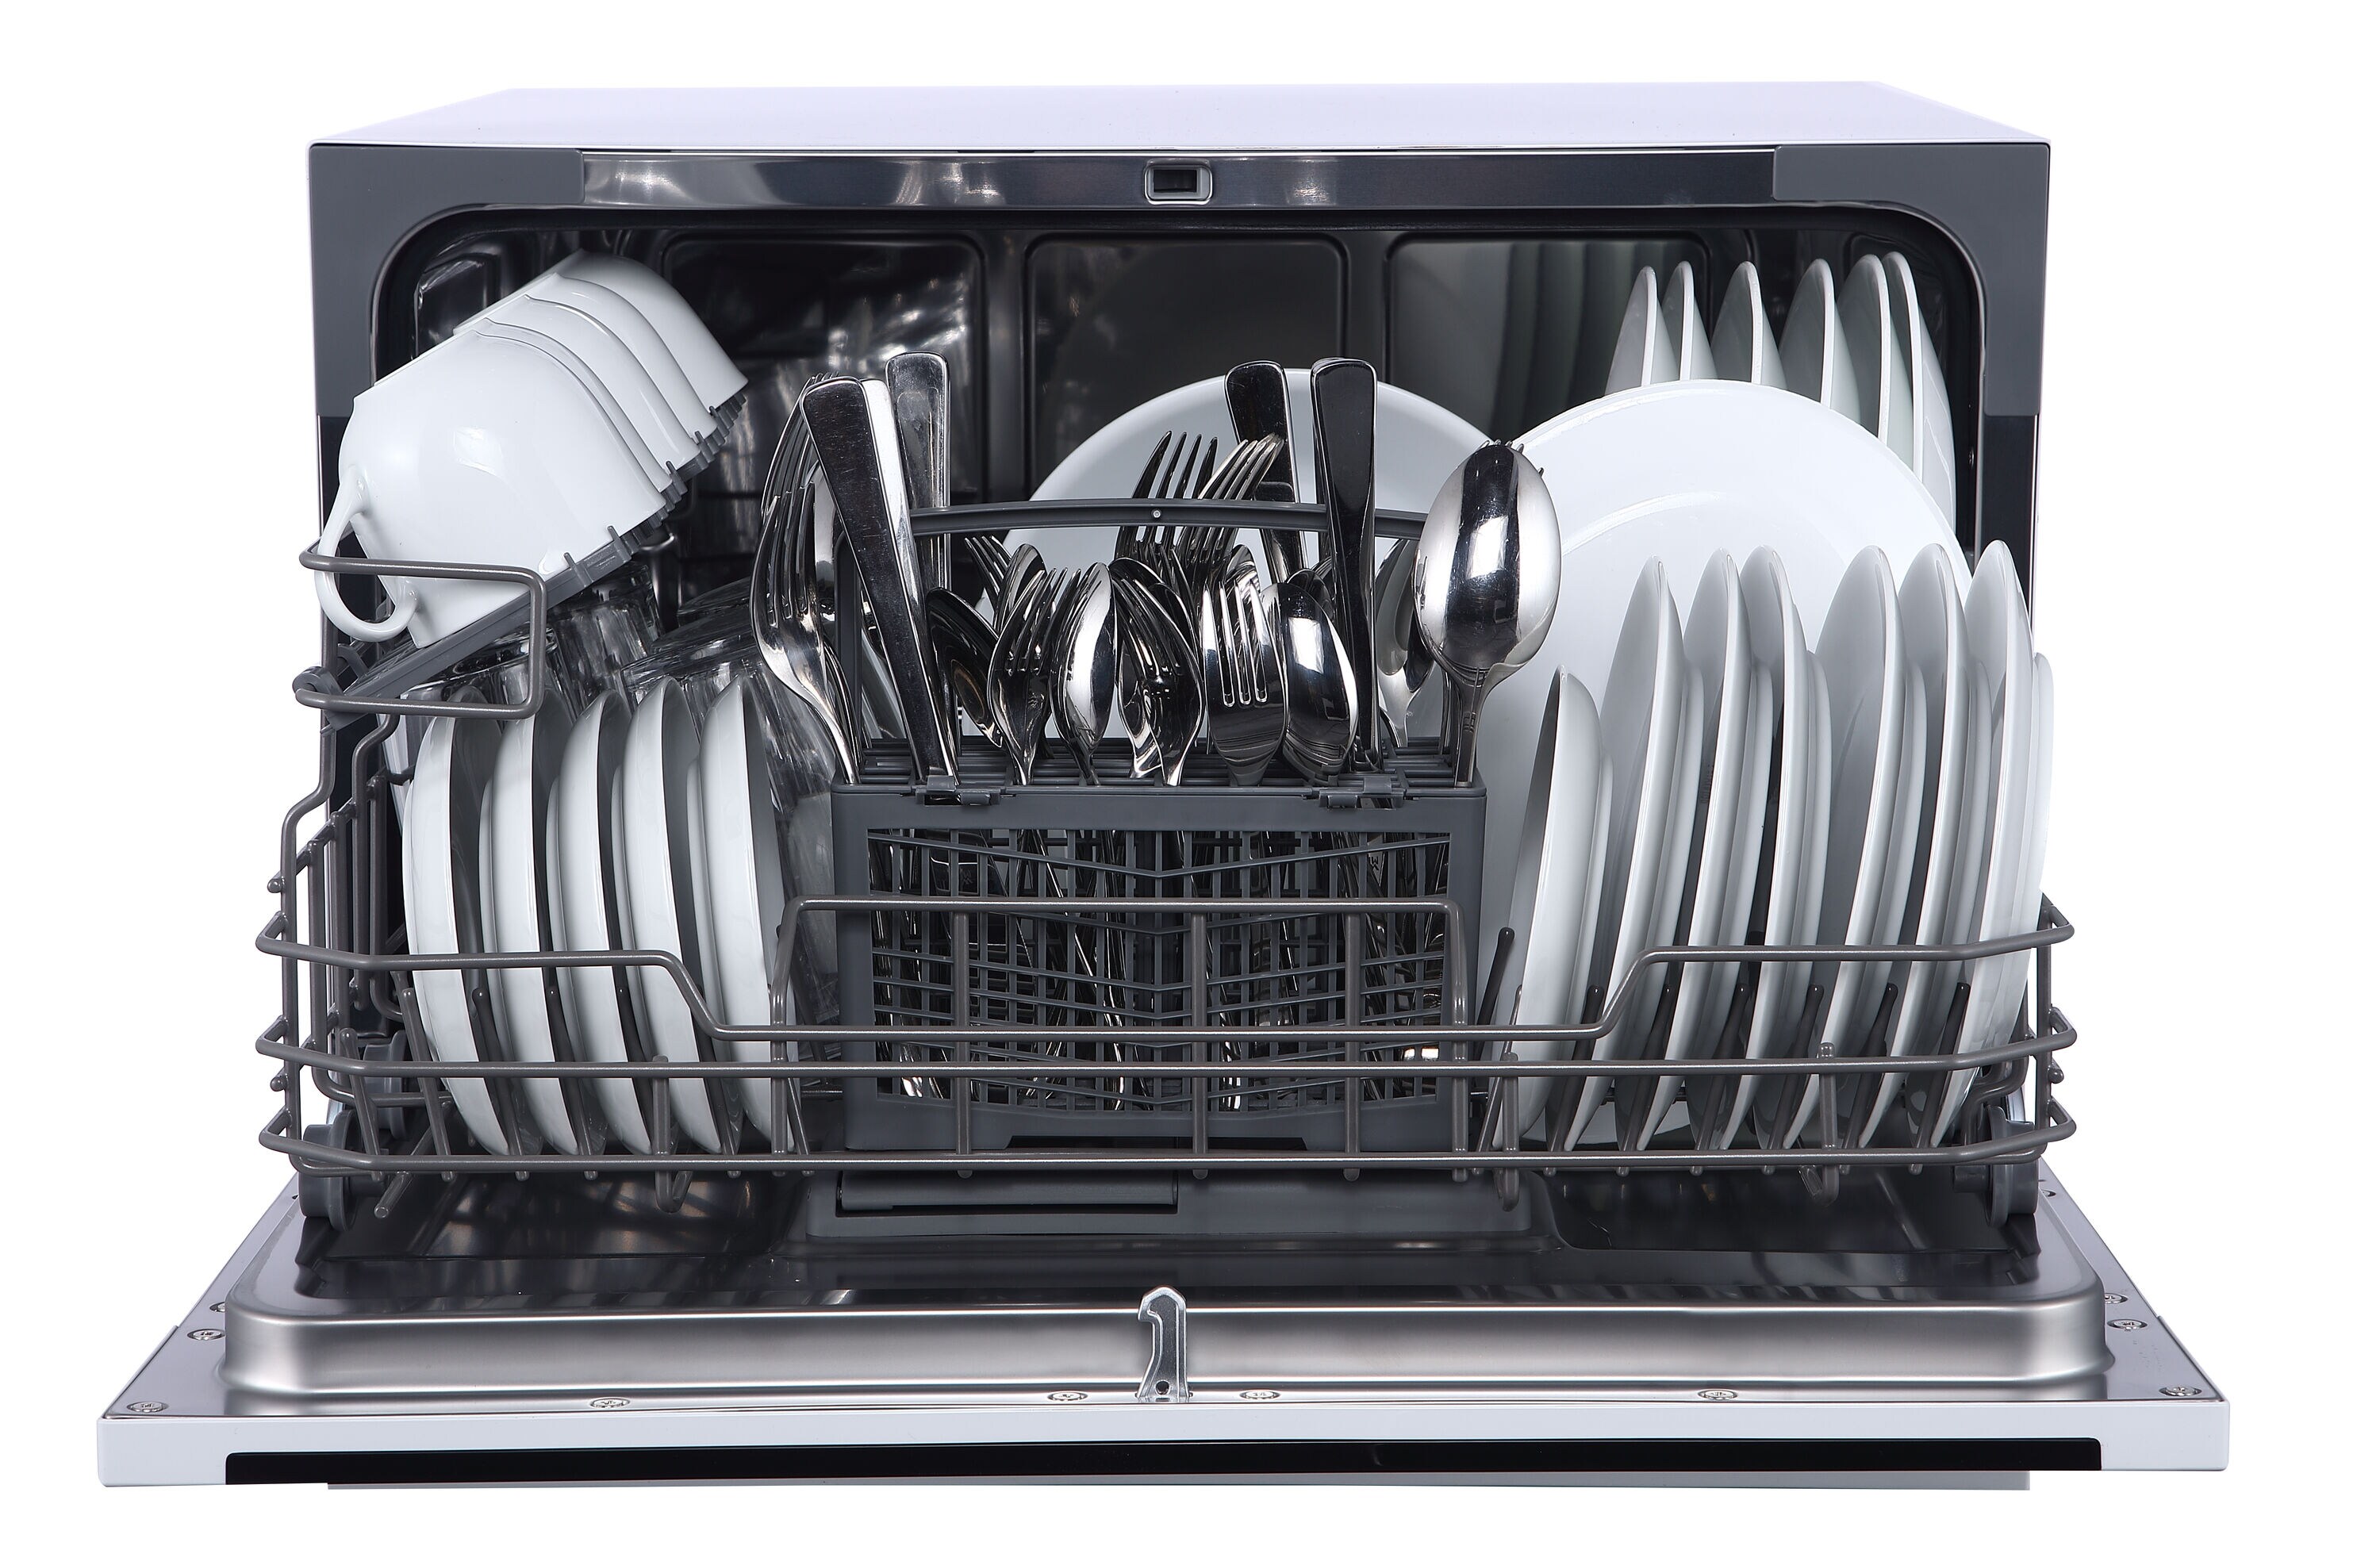 Biddergy - Worldwide Online Auction and Liquidation Services - Farberware  Compact Countertop Dishwasher